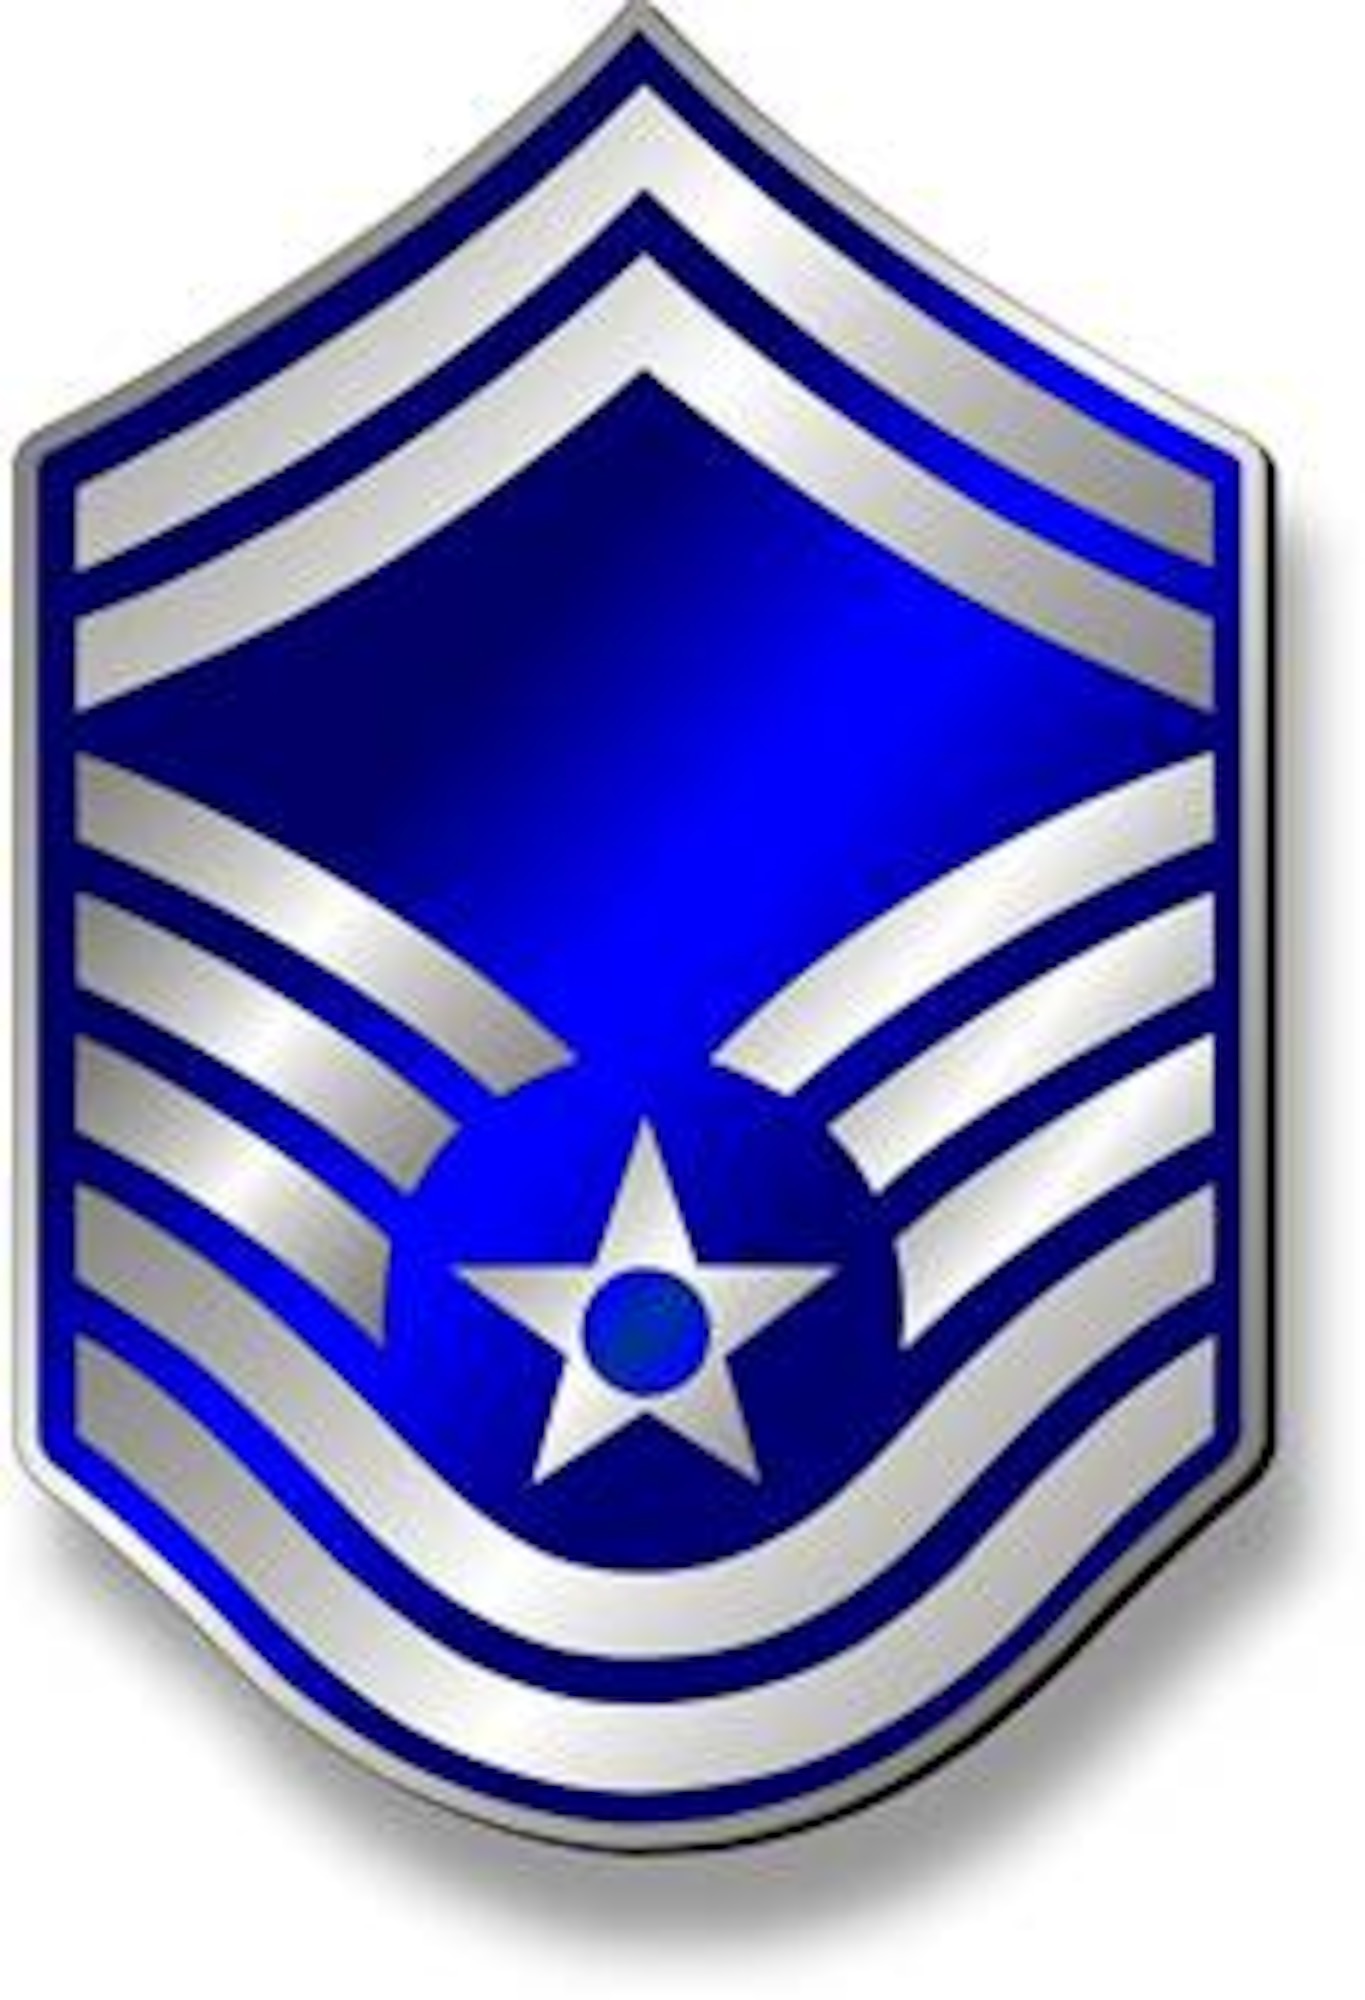 Senior Master Sergeant, SMSgt Stripes (Metallic).  Insignia provided by ITC(SW) MIke Purcell.